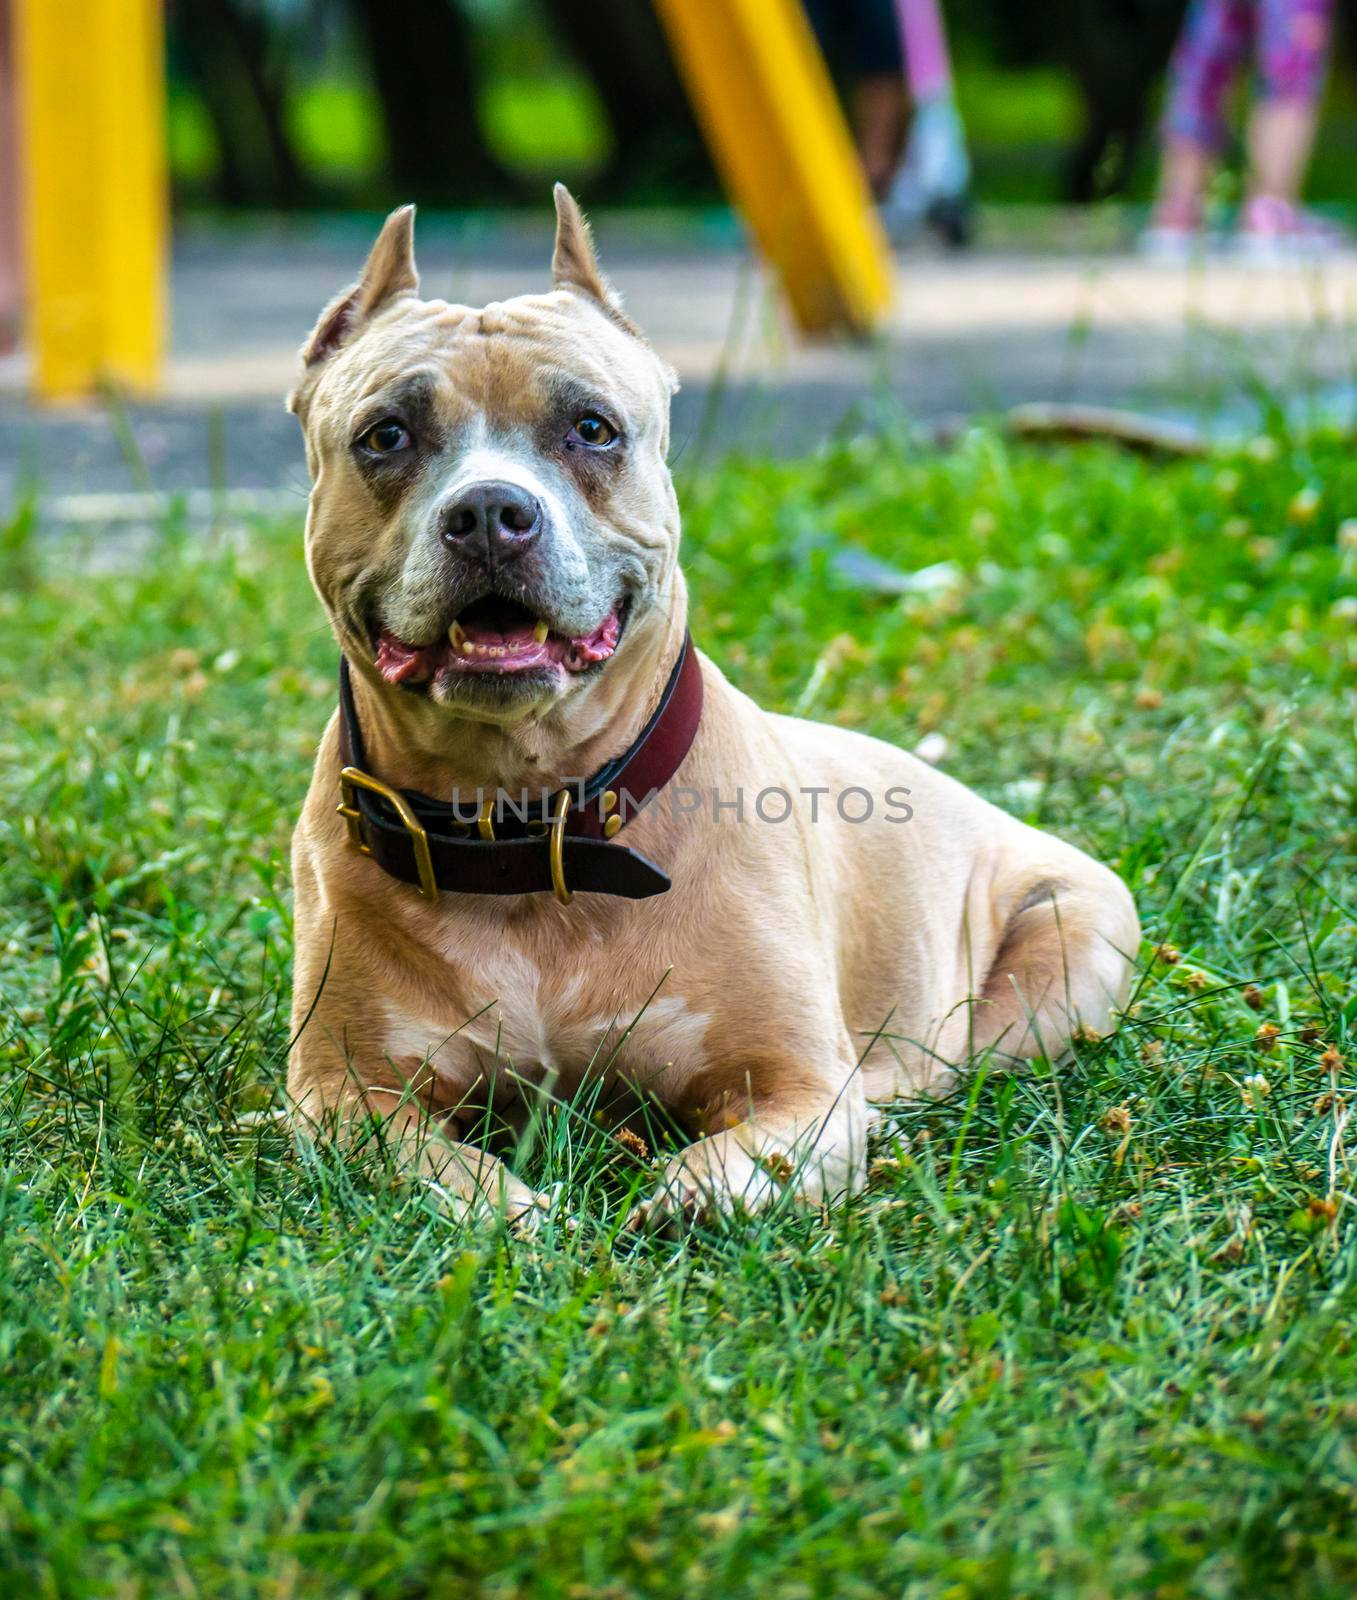 a happy dog, Staffordshire Bull Terrier. blur background by lempro